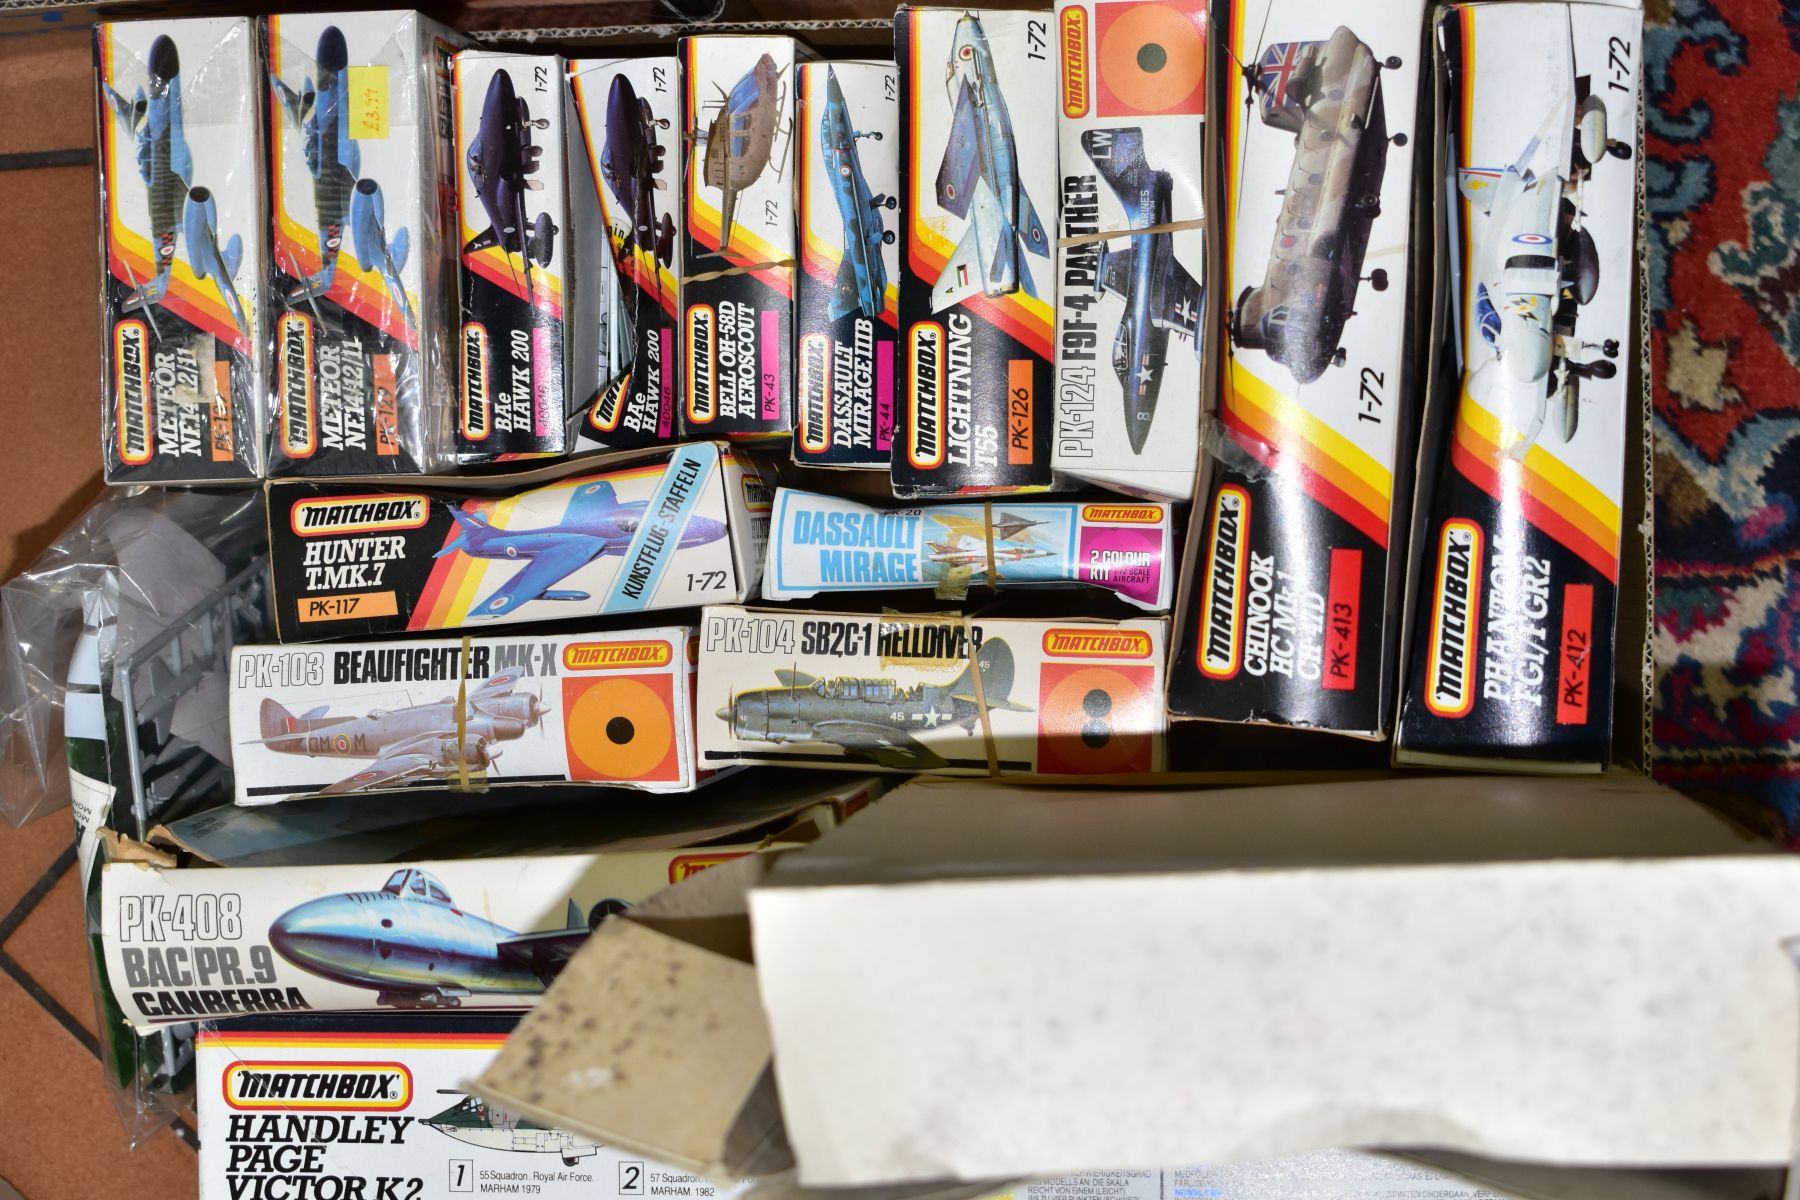 A QUANTITY OF BOXED UNBUILT MATCHBOX PLASTIC CONSTRUCTION KITS, majority are assorted military